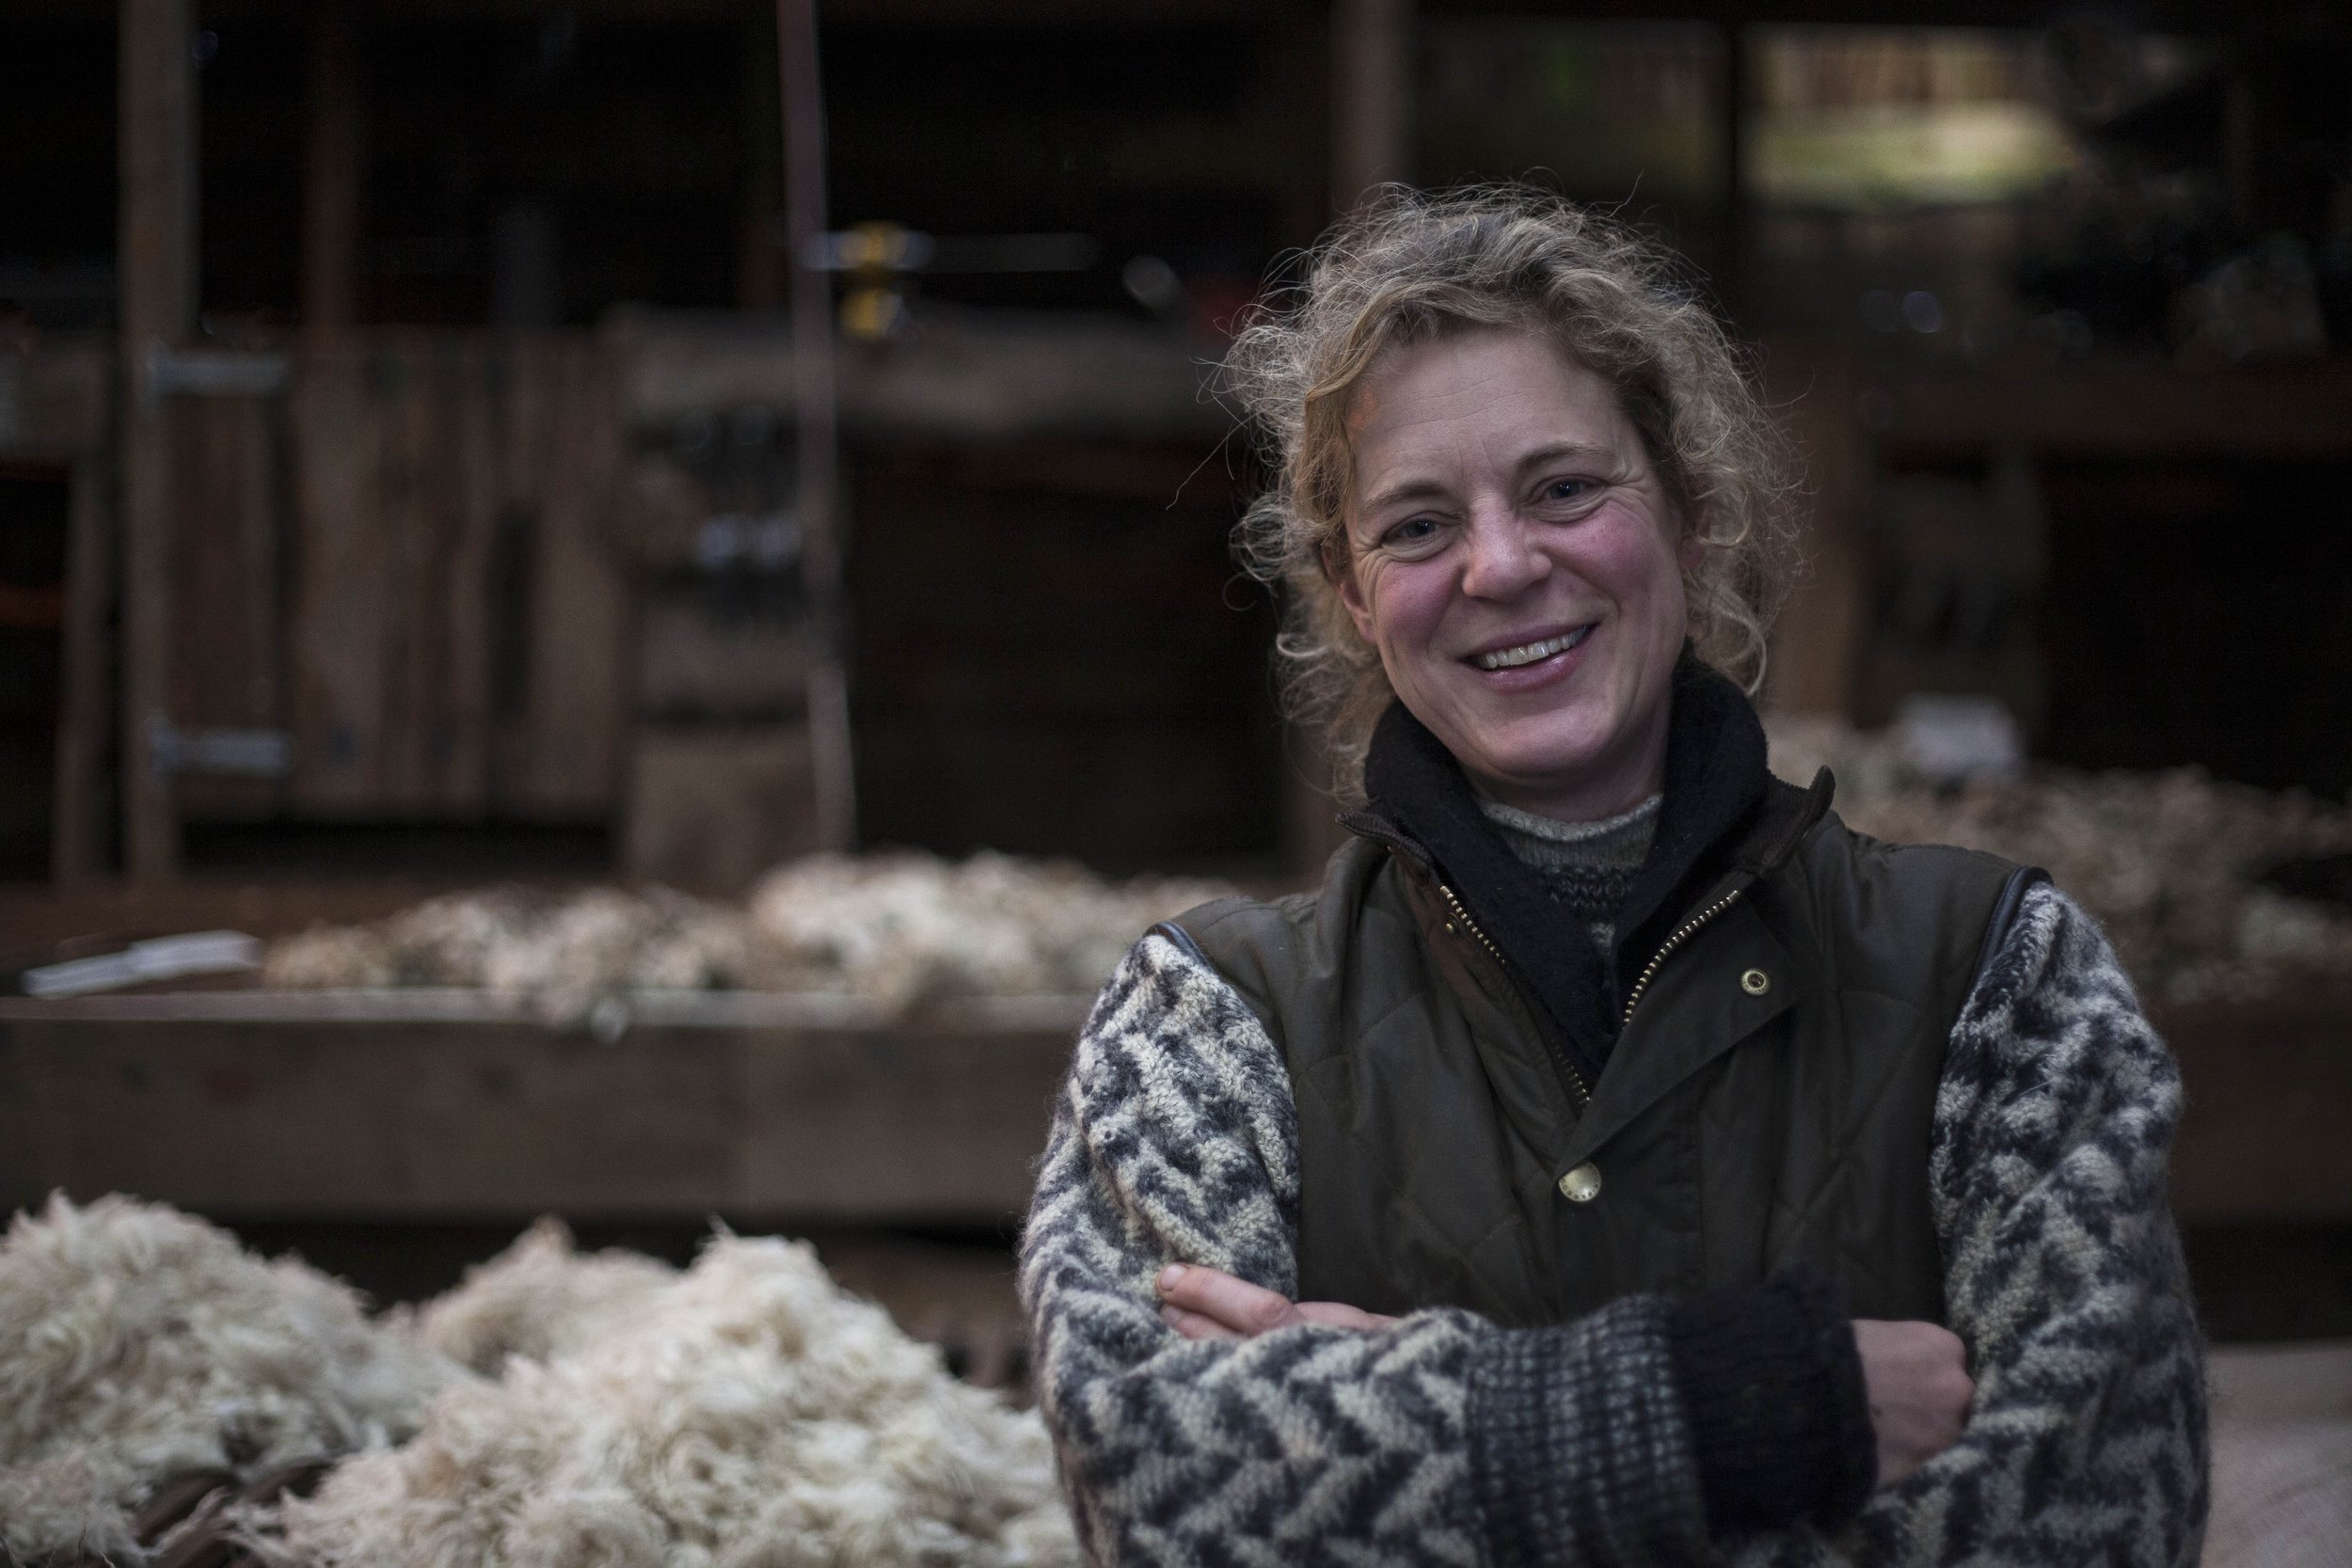 Landscape photograph by Hatty Frances Bell of female farmer smiling in her barn full of wool at Fernhill Farm